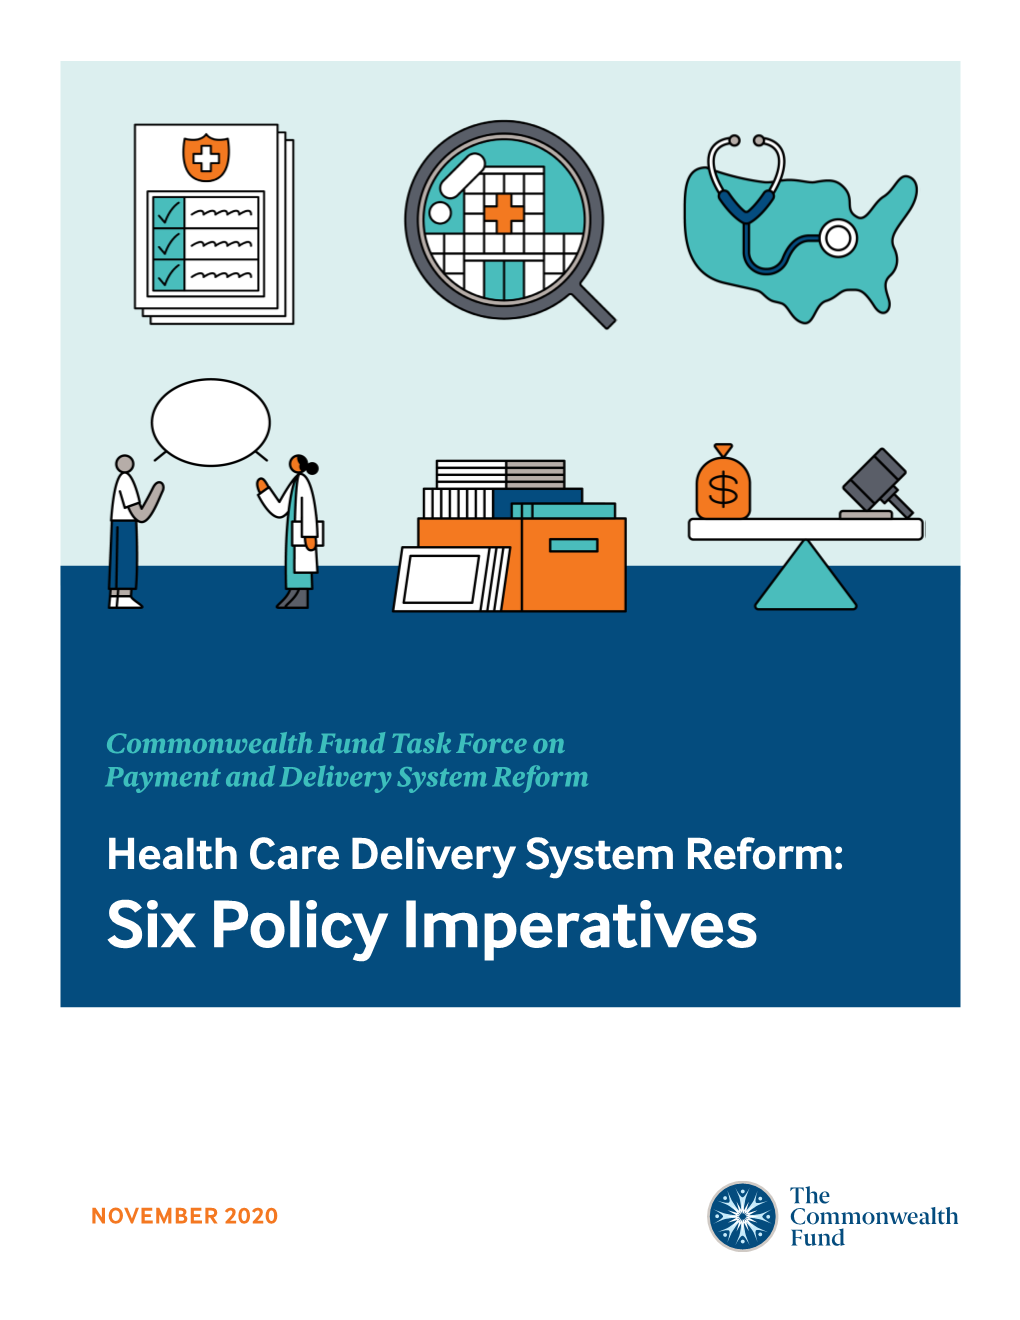 Health Care Delivery System Reform: Six Policy Imperatives